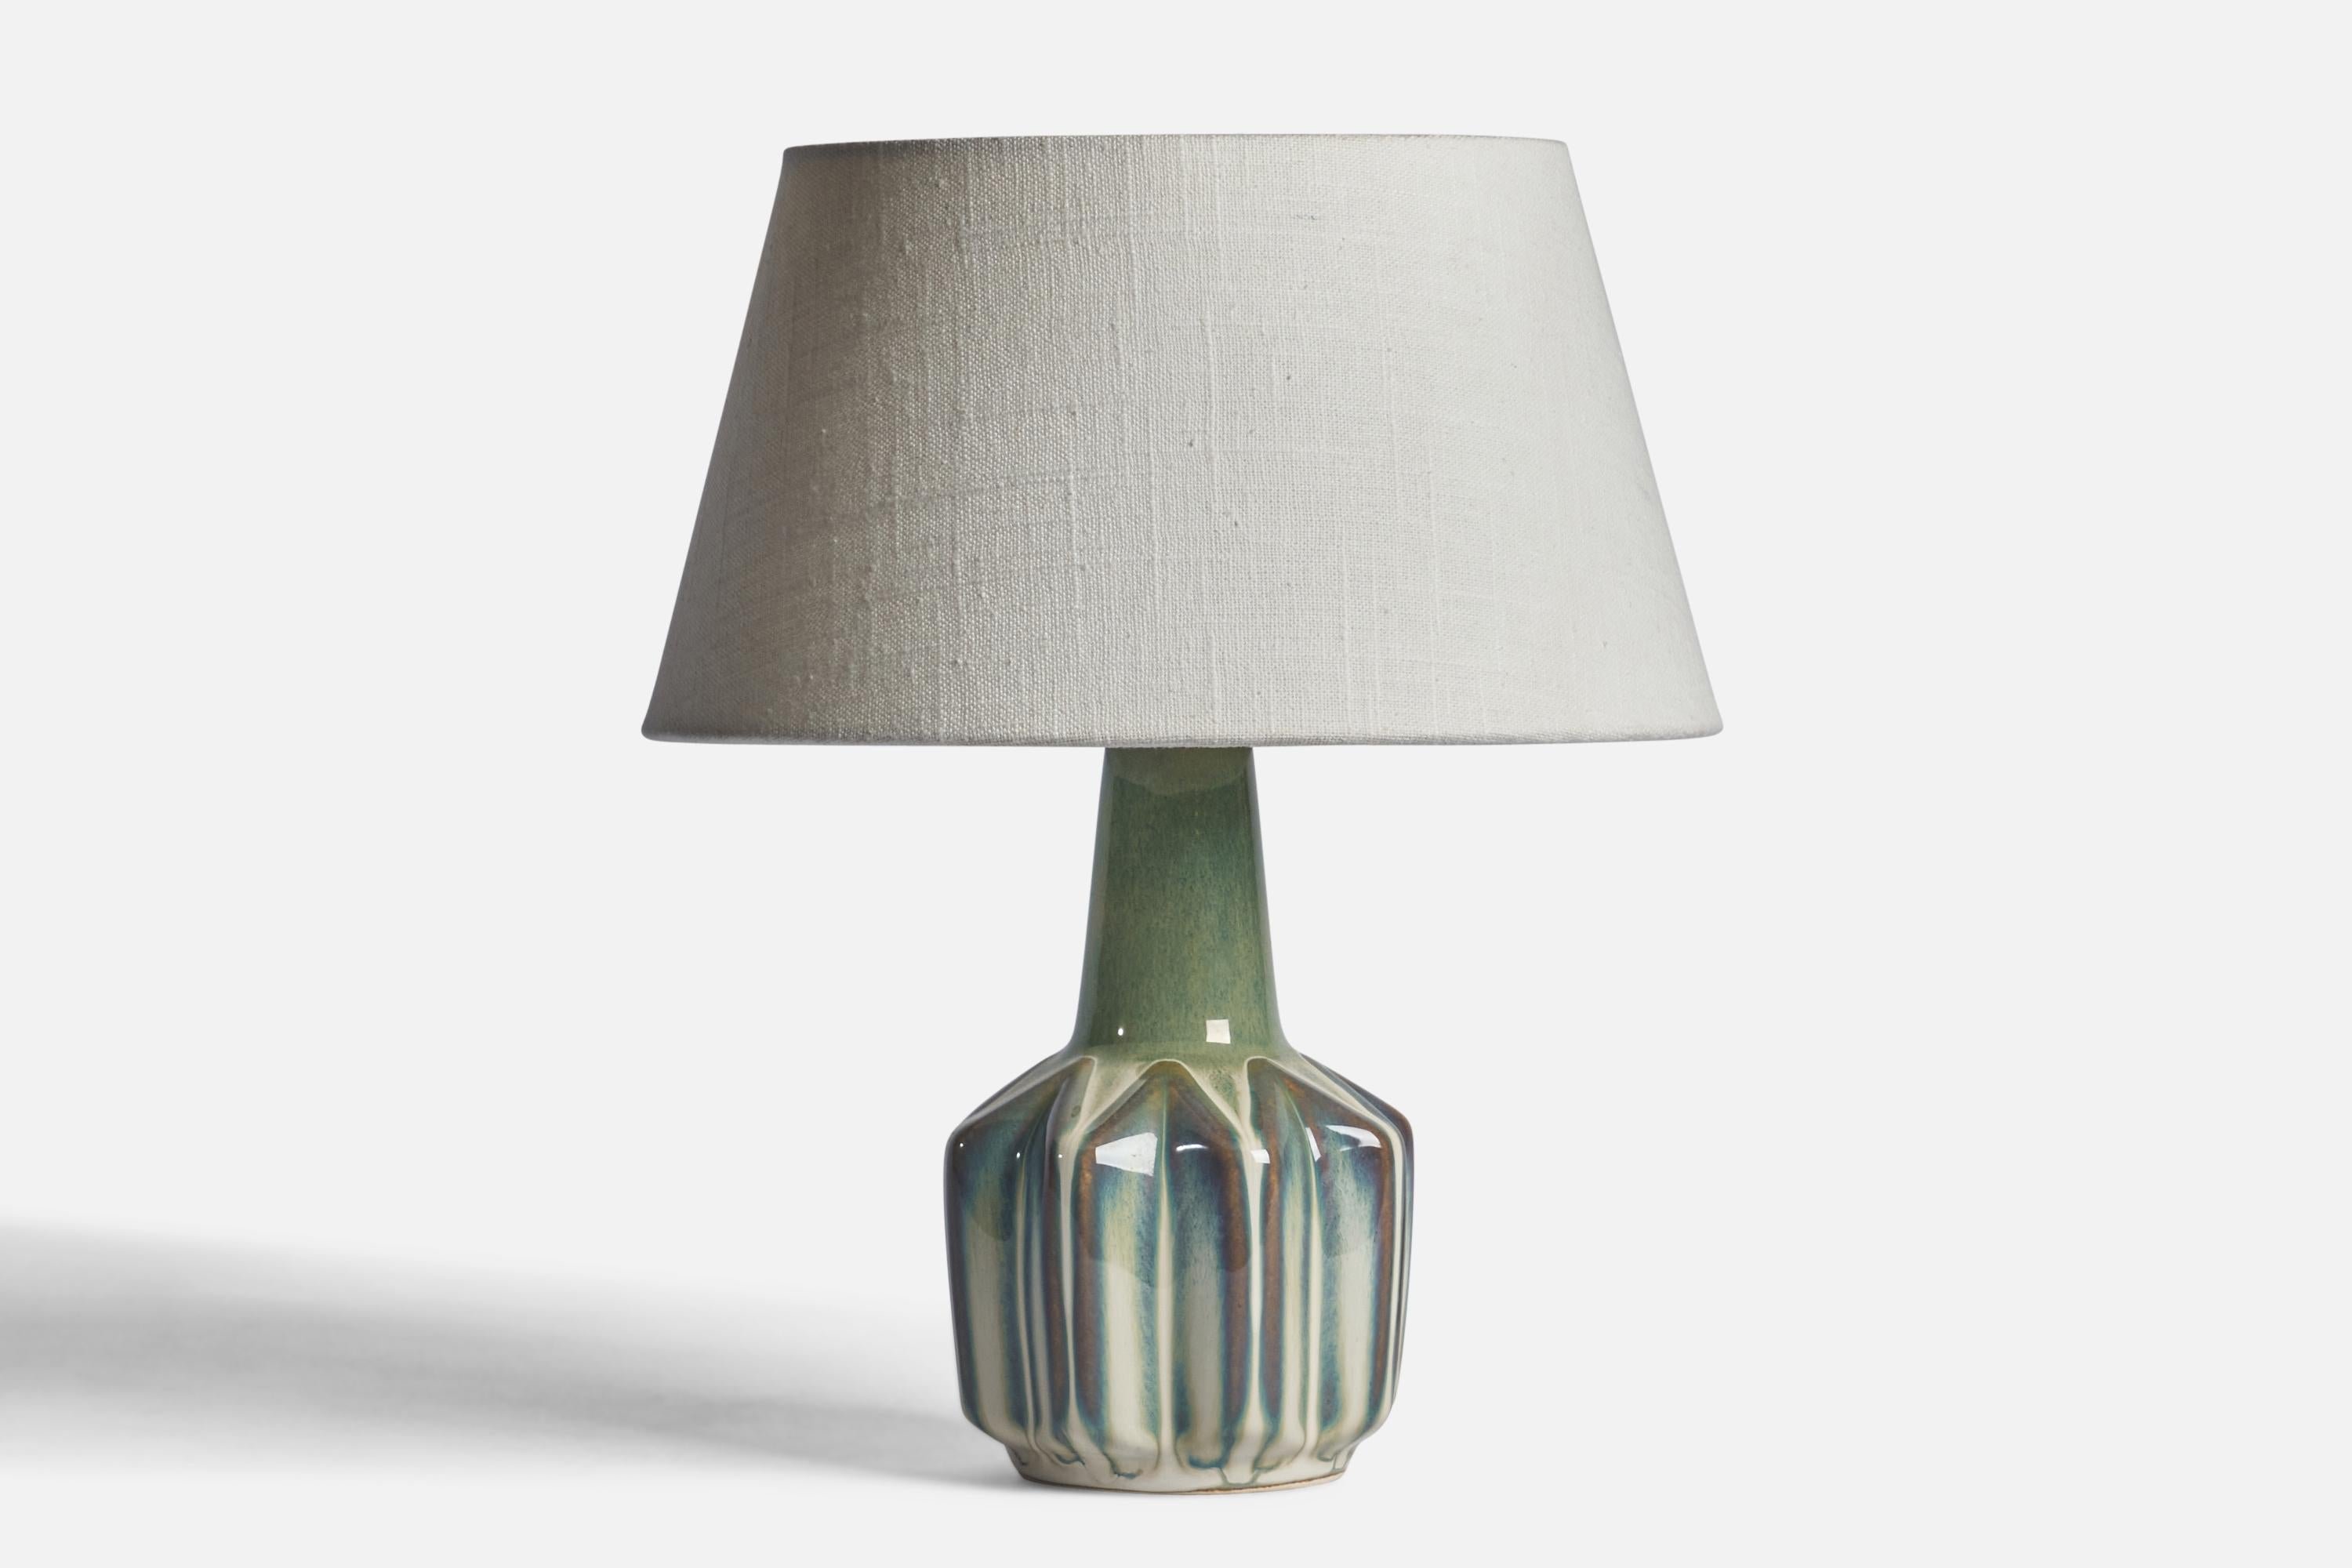 A green-glazed stoneware table lamp designed and produced by Søholm, Bornholm, Denmark, 1960s.

Dimensions of Lamp (inches): 9.35” H x 4.25” Diameter
Dimensions of Shade (inches): 7” Top Diameter x 10” Bottom Diameter x 5.5” H 
Dimensions of Lamp